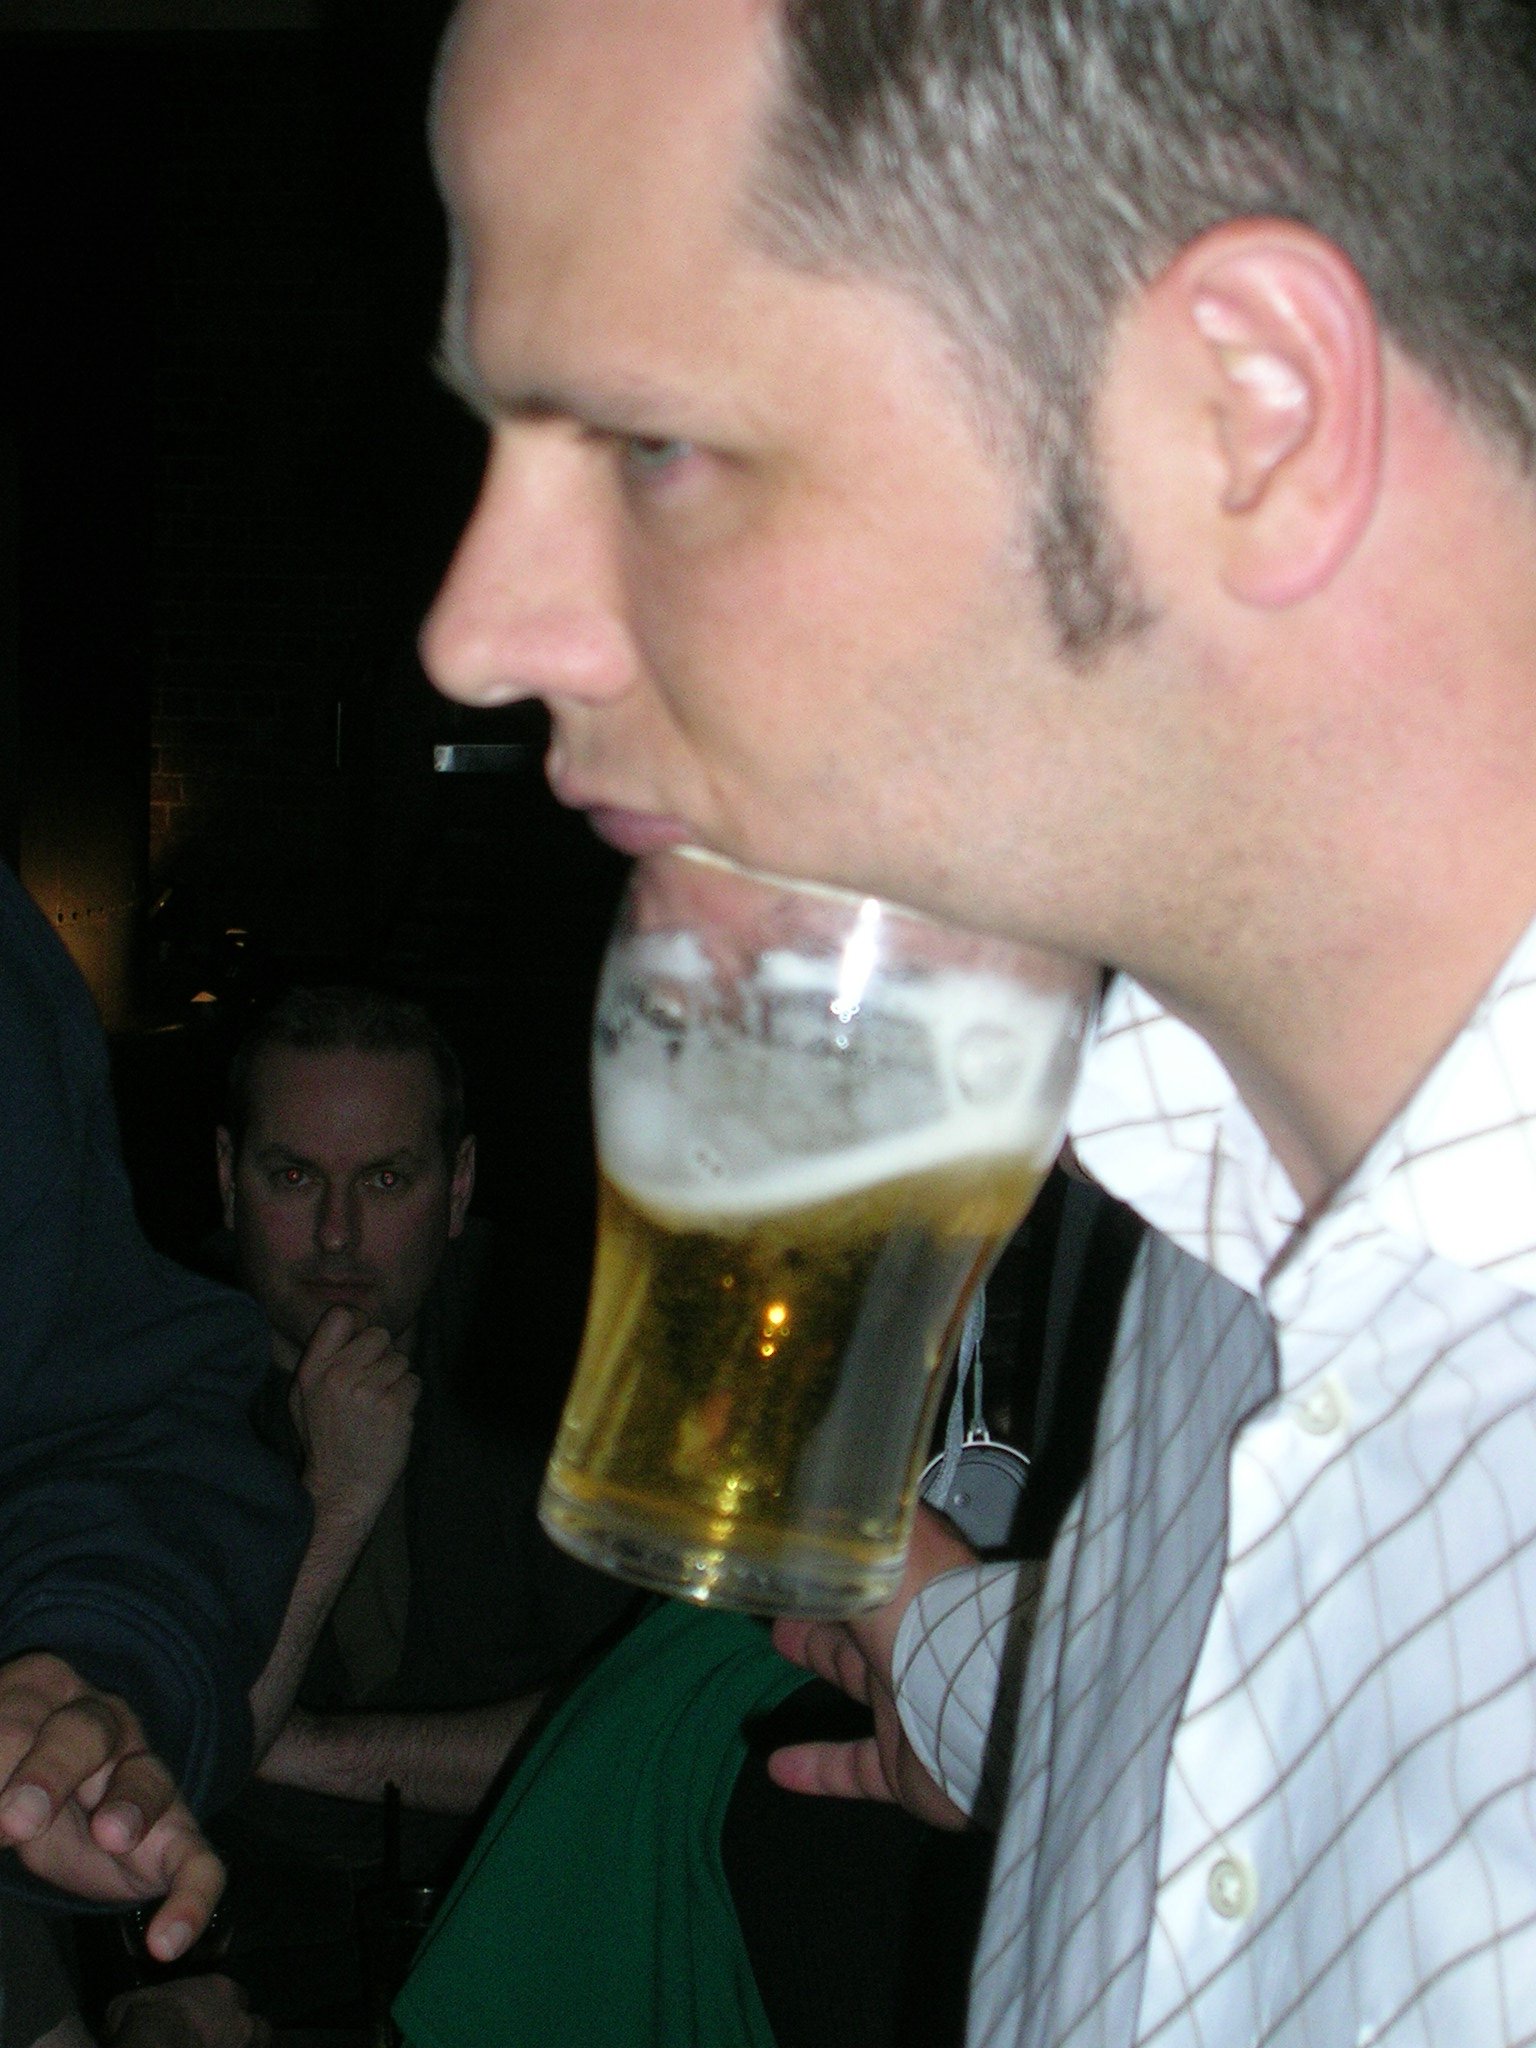 a man wearing a striped shirt has a beer mug with soing in it